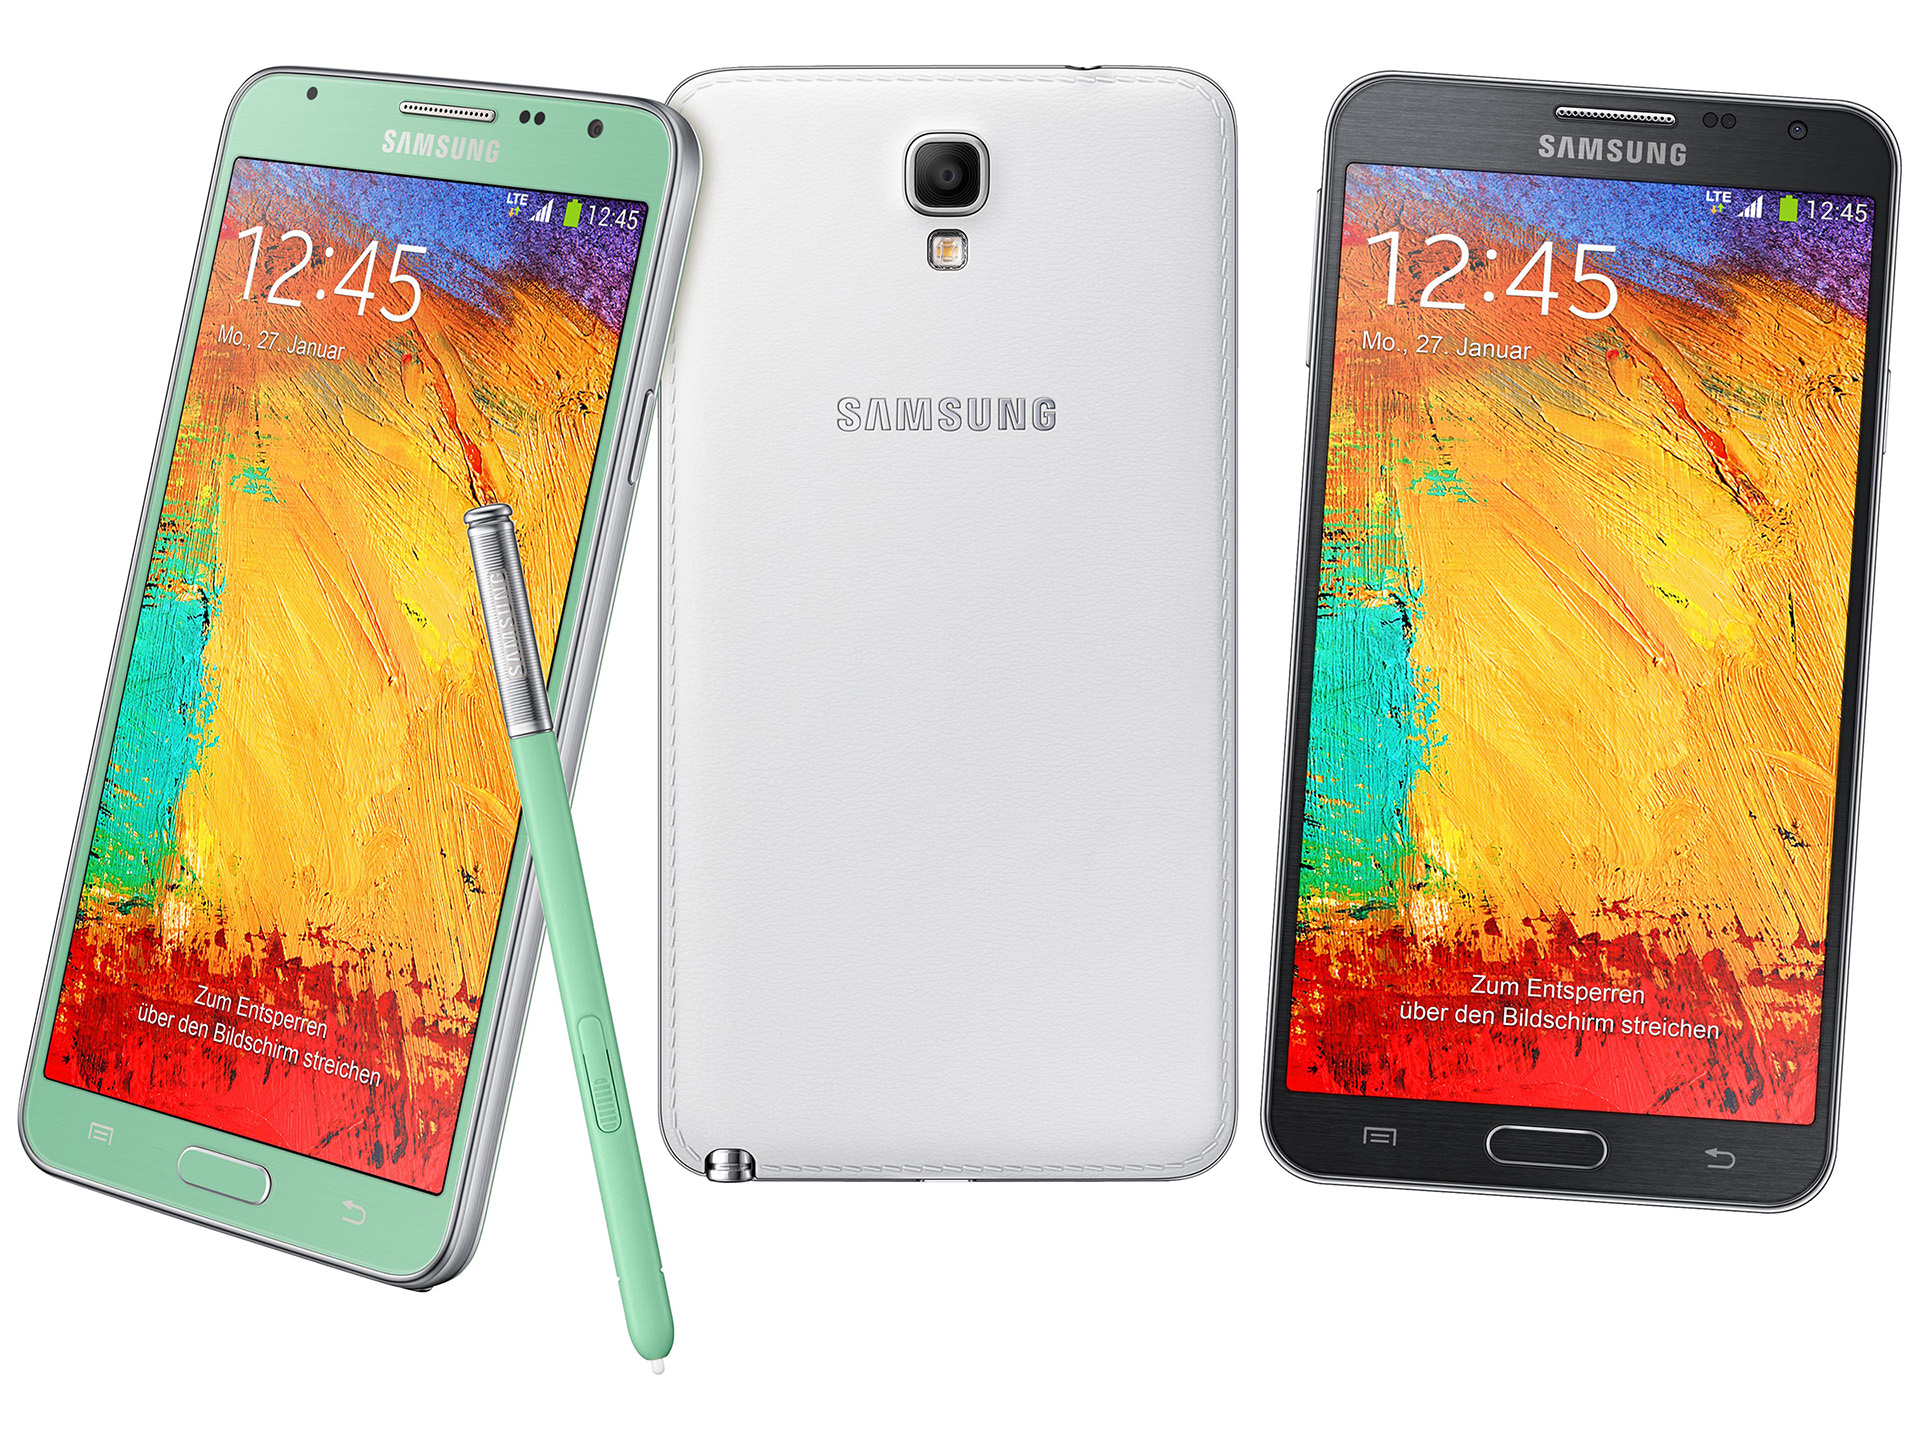 Samsung Galaxy Note 3 review - CNET